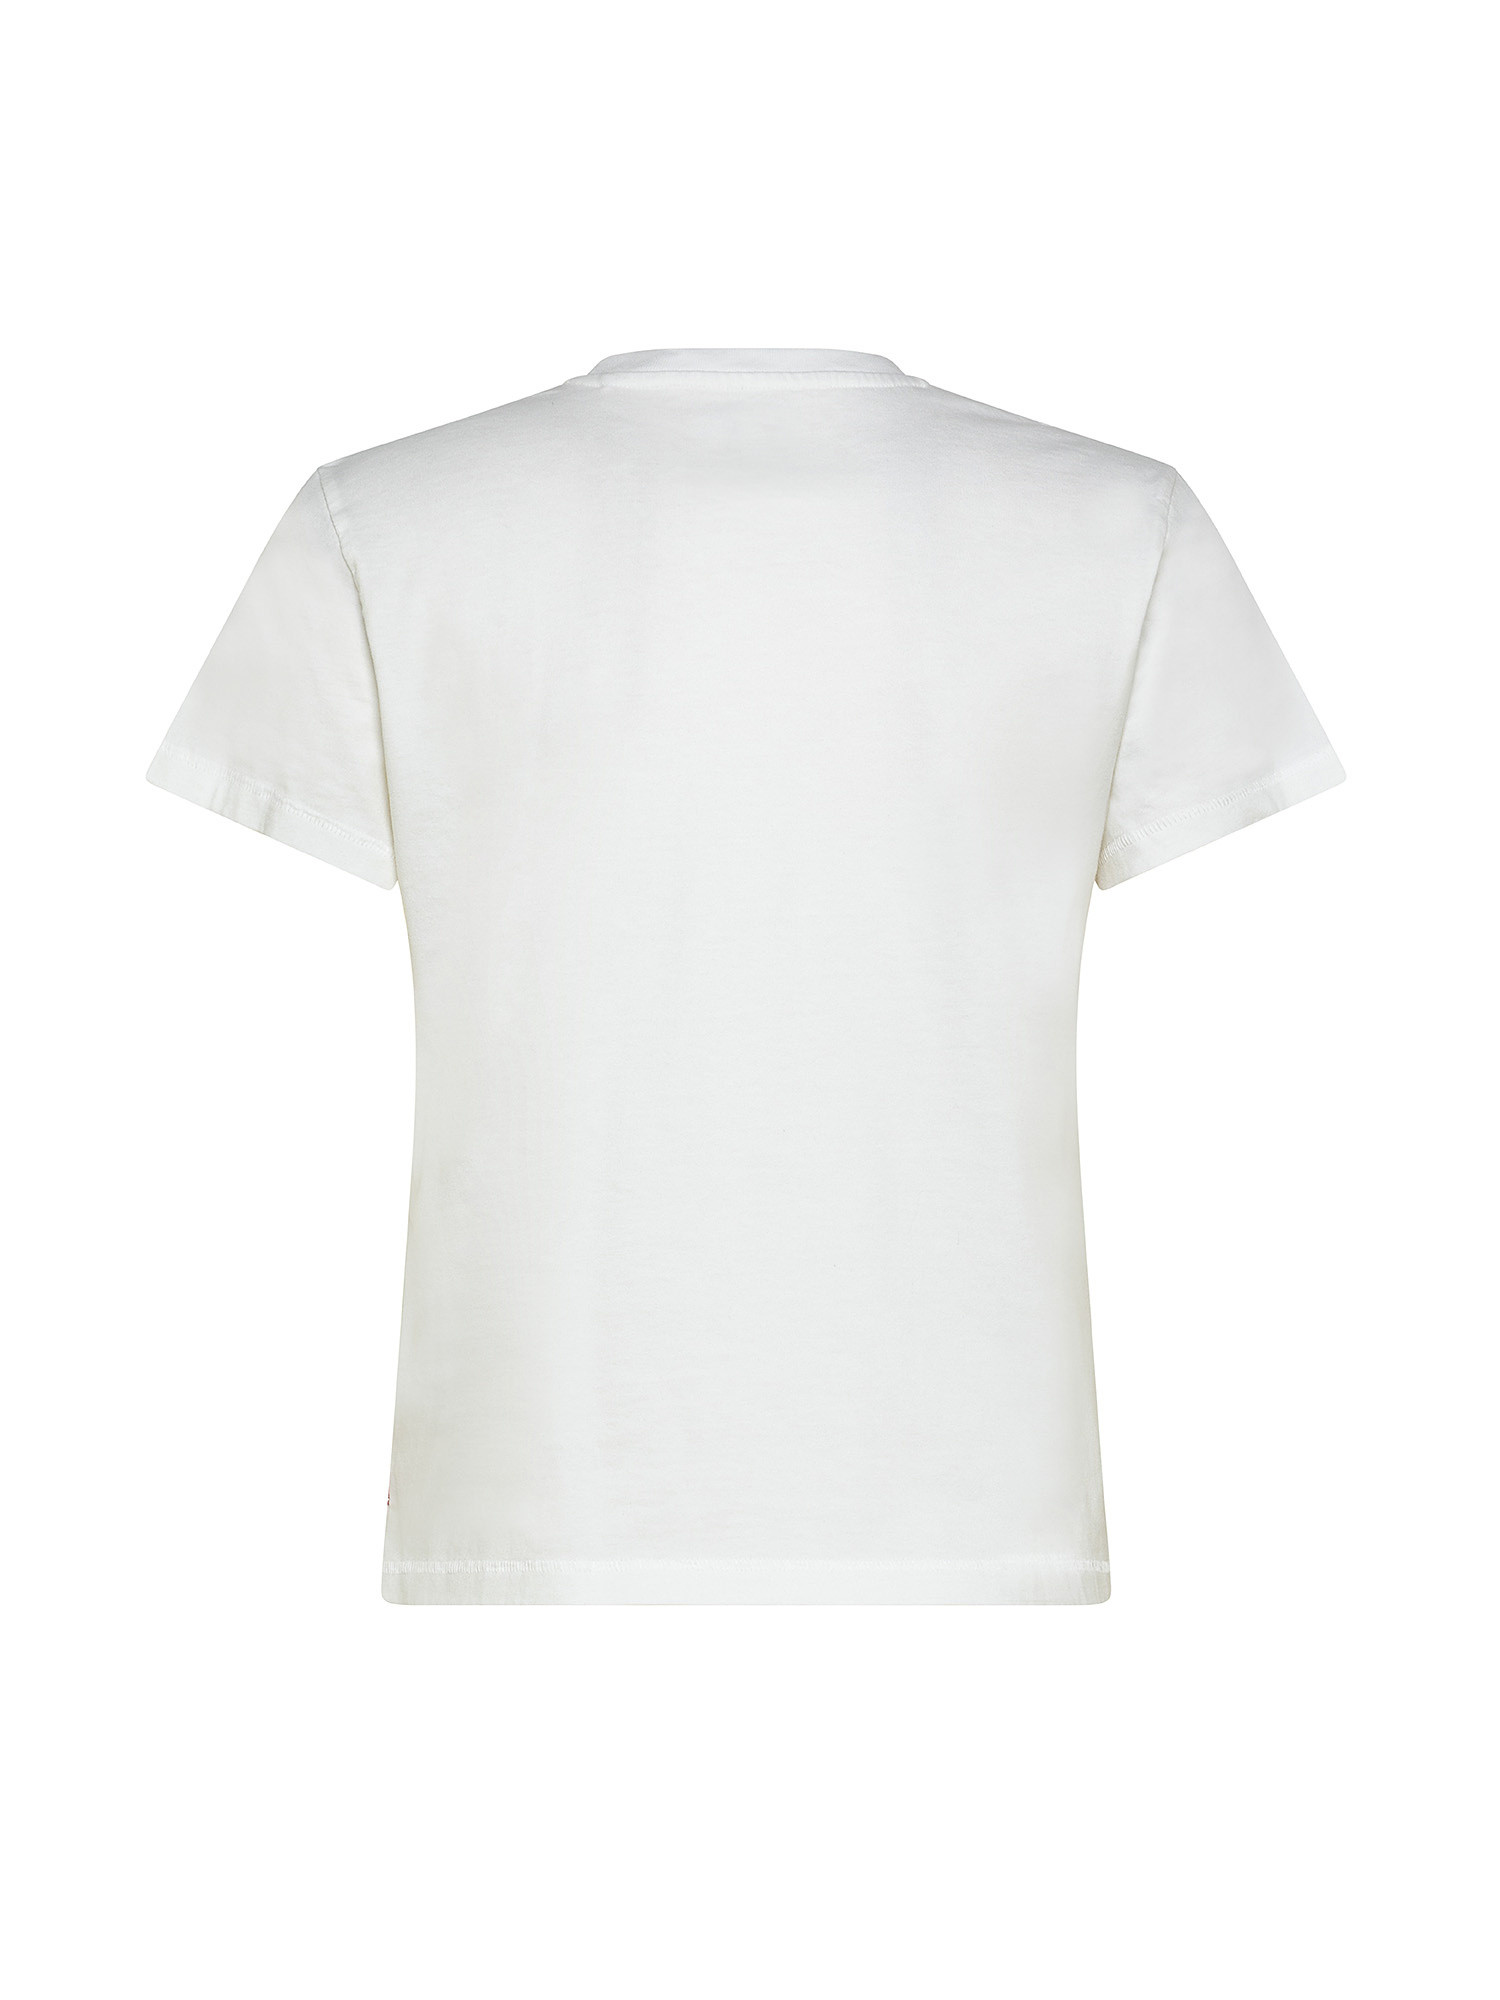 T-shirt Graphic Classic Tee, Bianco, large image number 2